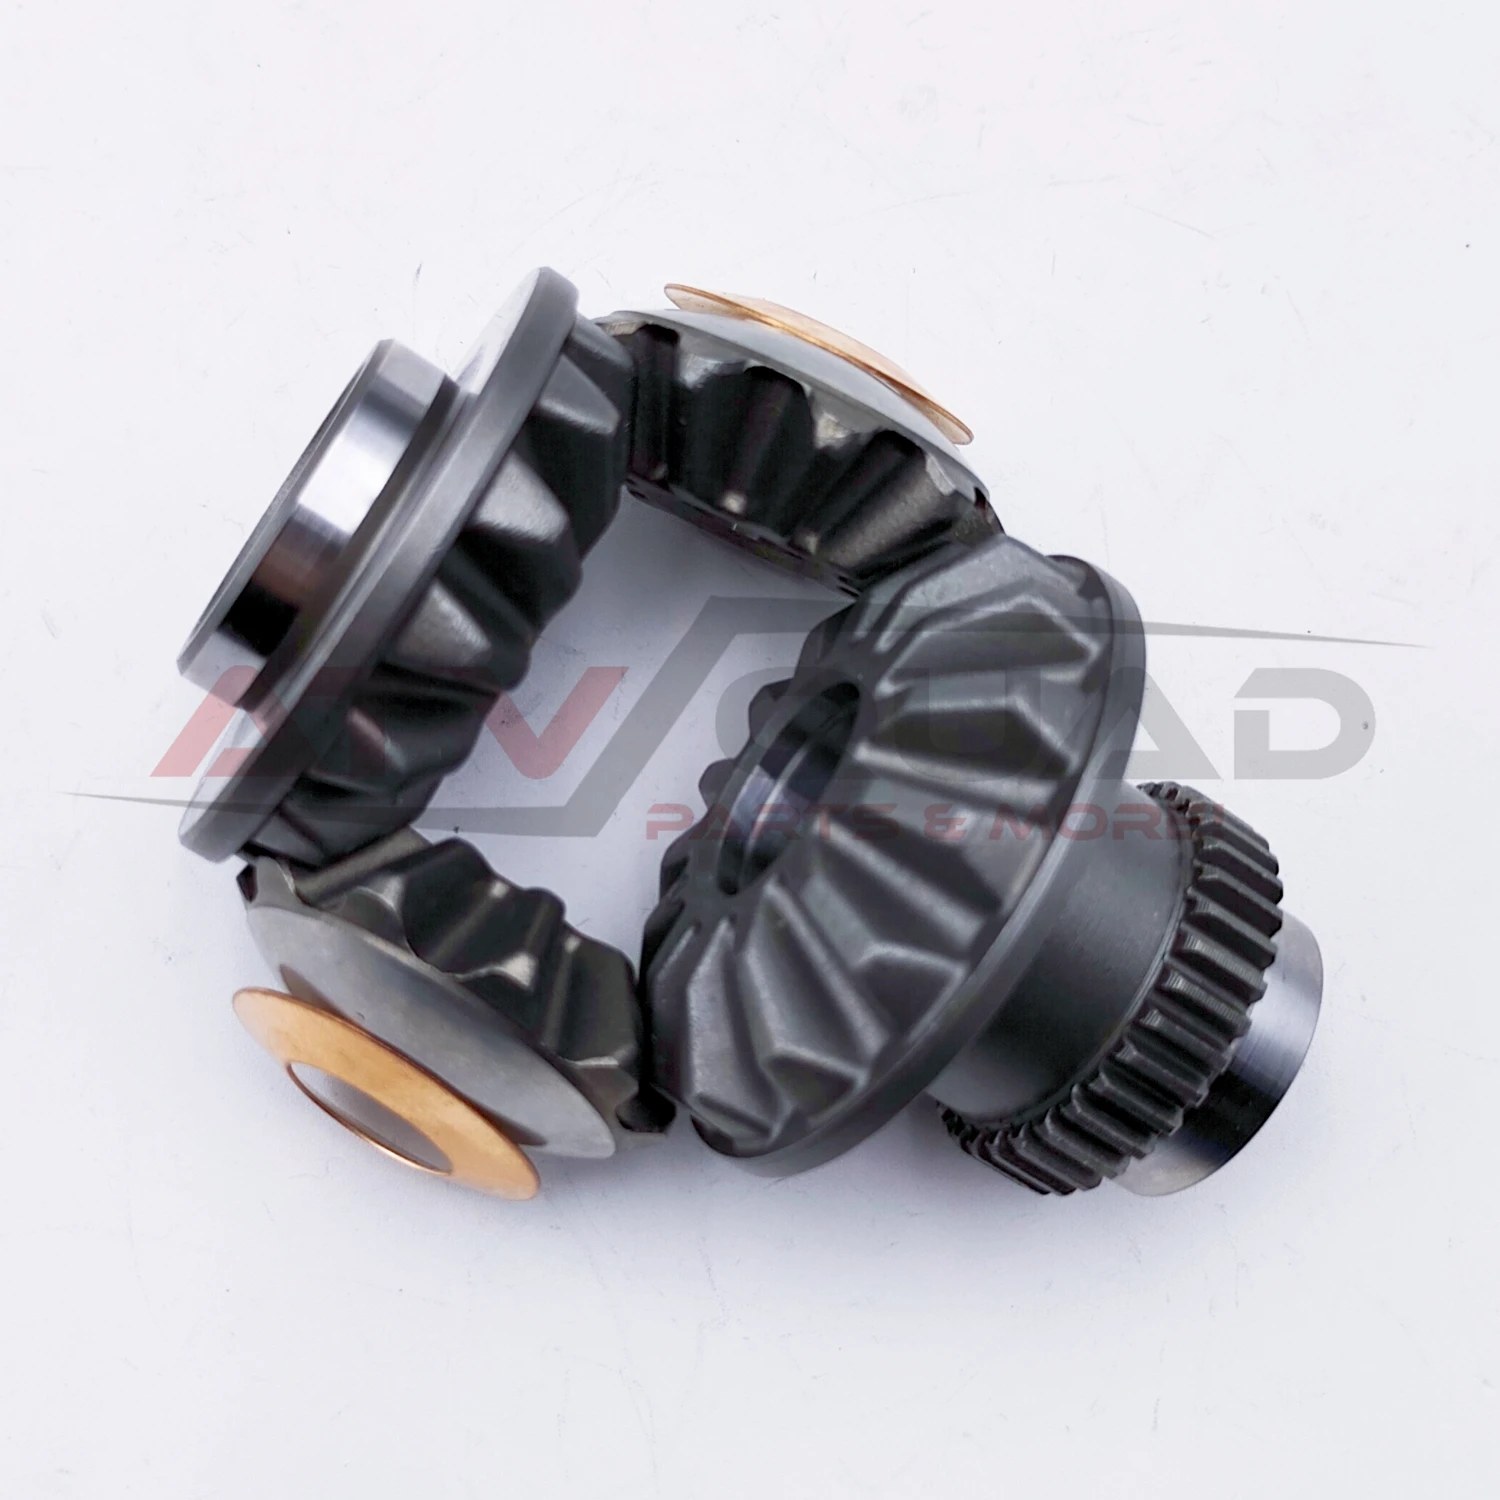 Differential Drive Driven Gear Kit for CFmoto 800 X8 U8 800EX 800XC 850 950 1000 0180-313001 0181-313011 0180-313003 0180-313006